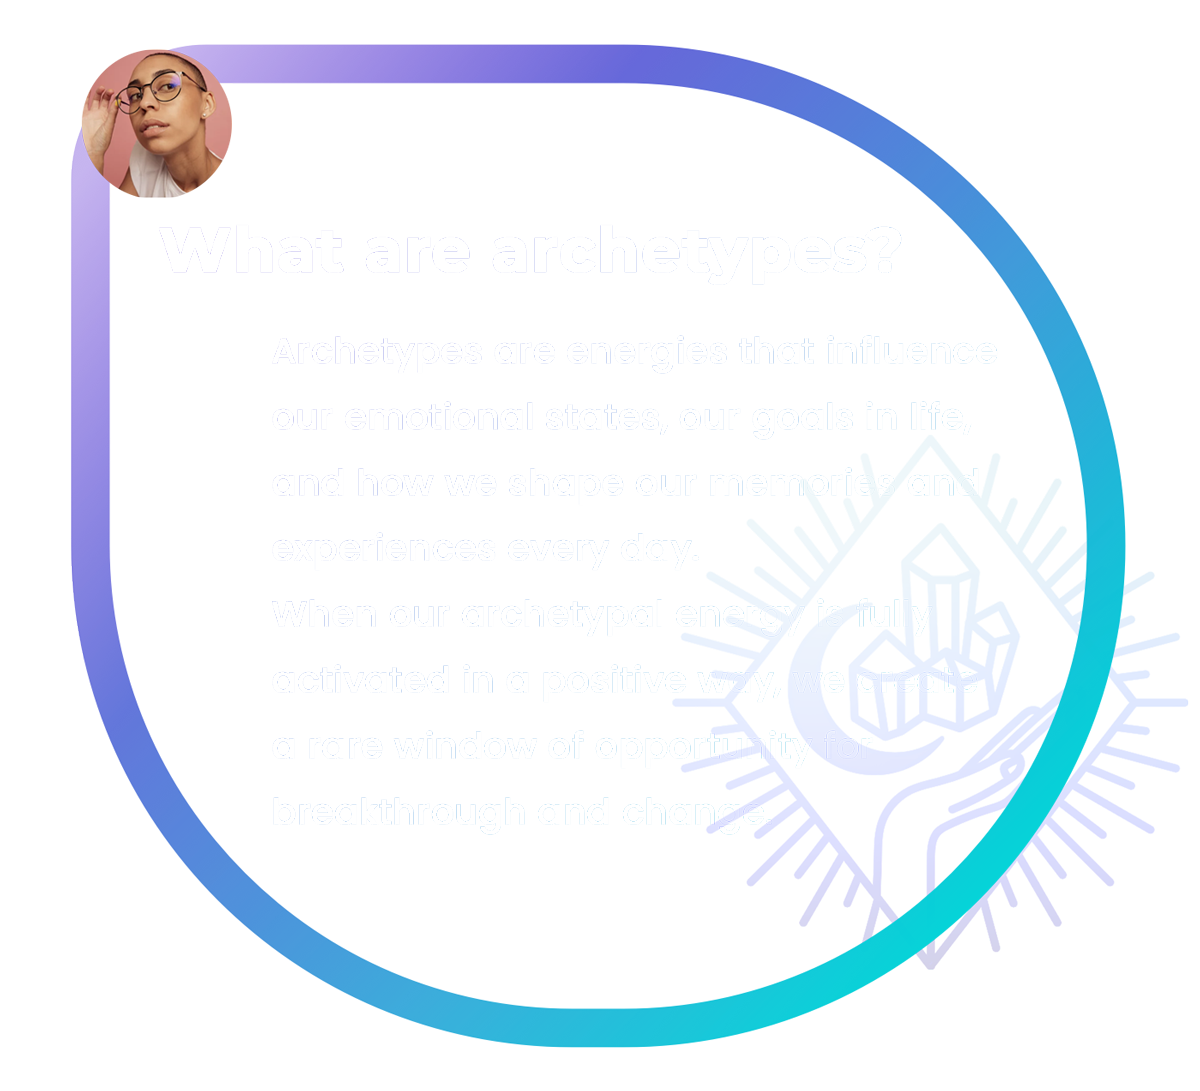 evrmore Archetypes can show you different aspects of your personality to help you improve your mindset